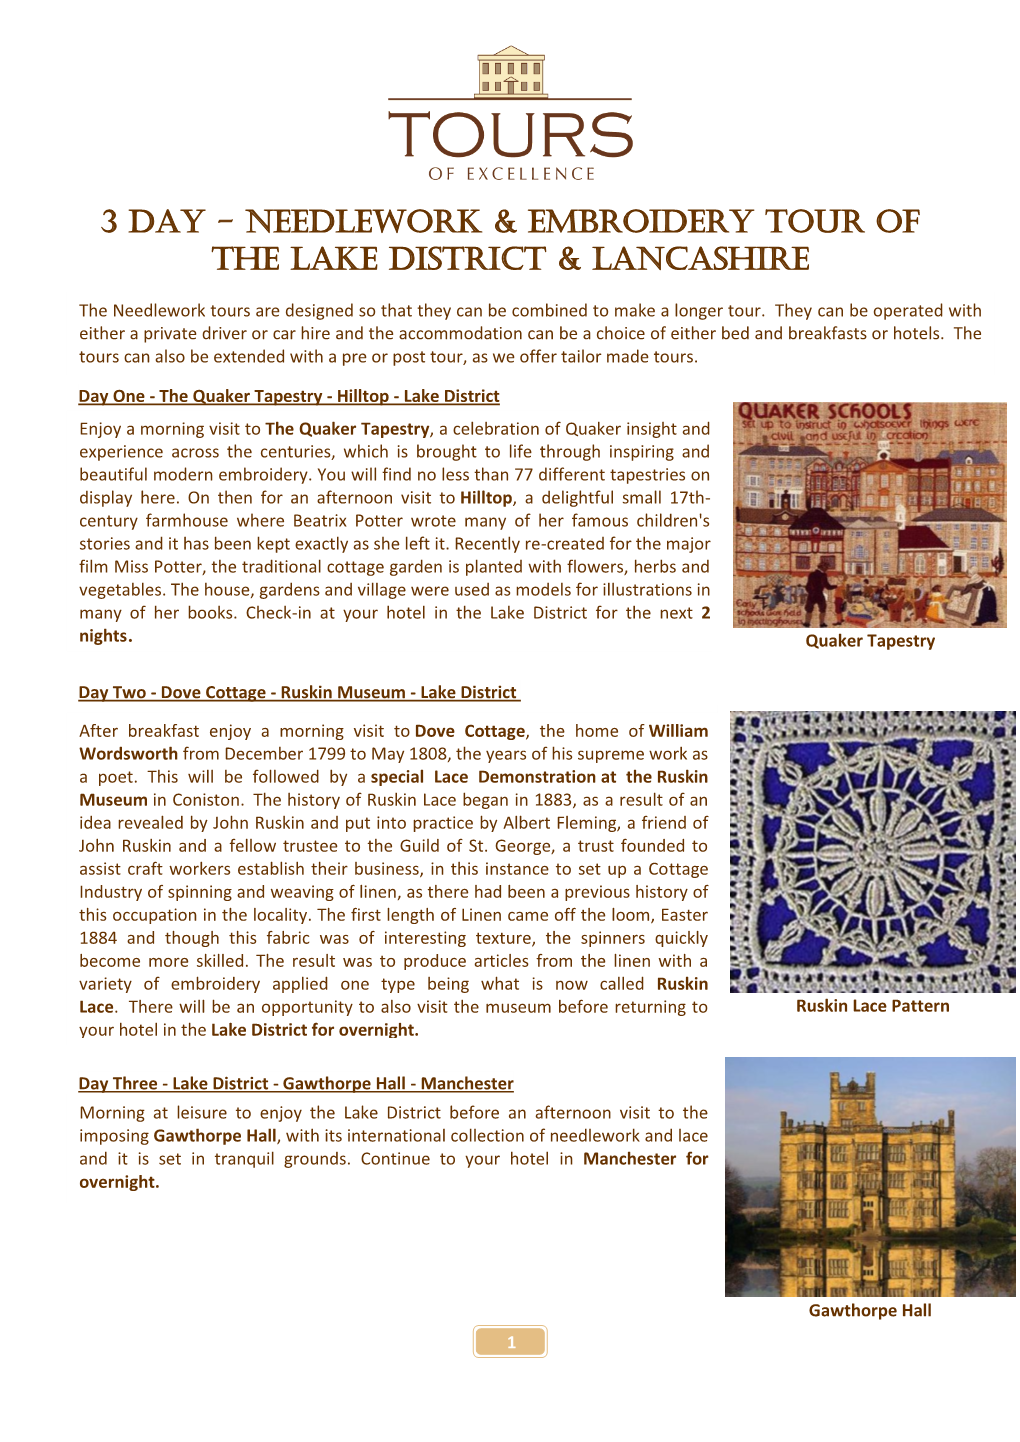 3 Day - Needlework & Embroidery Tour of the Lake District & Lancashire